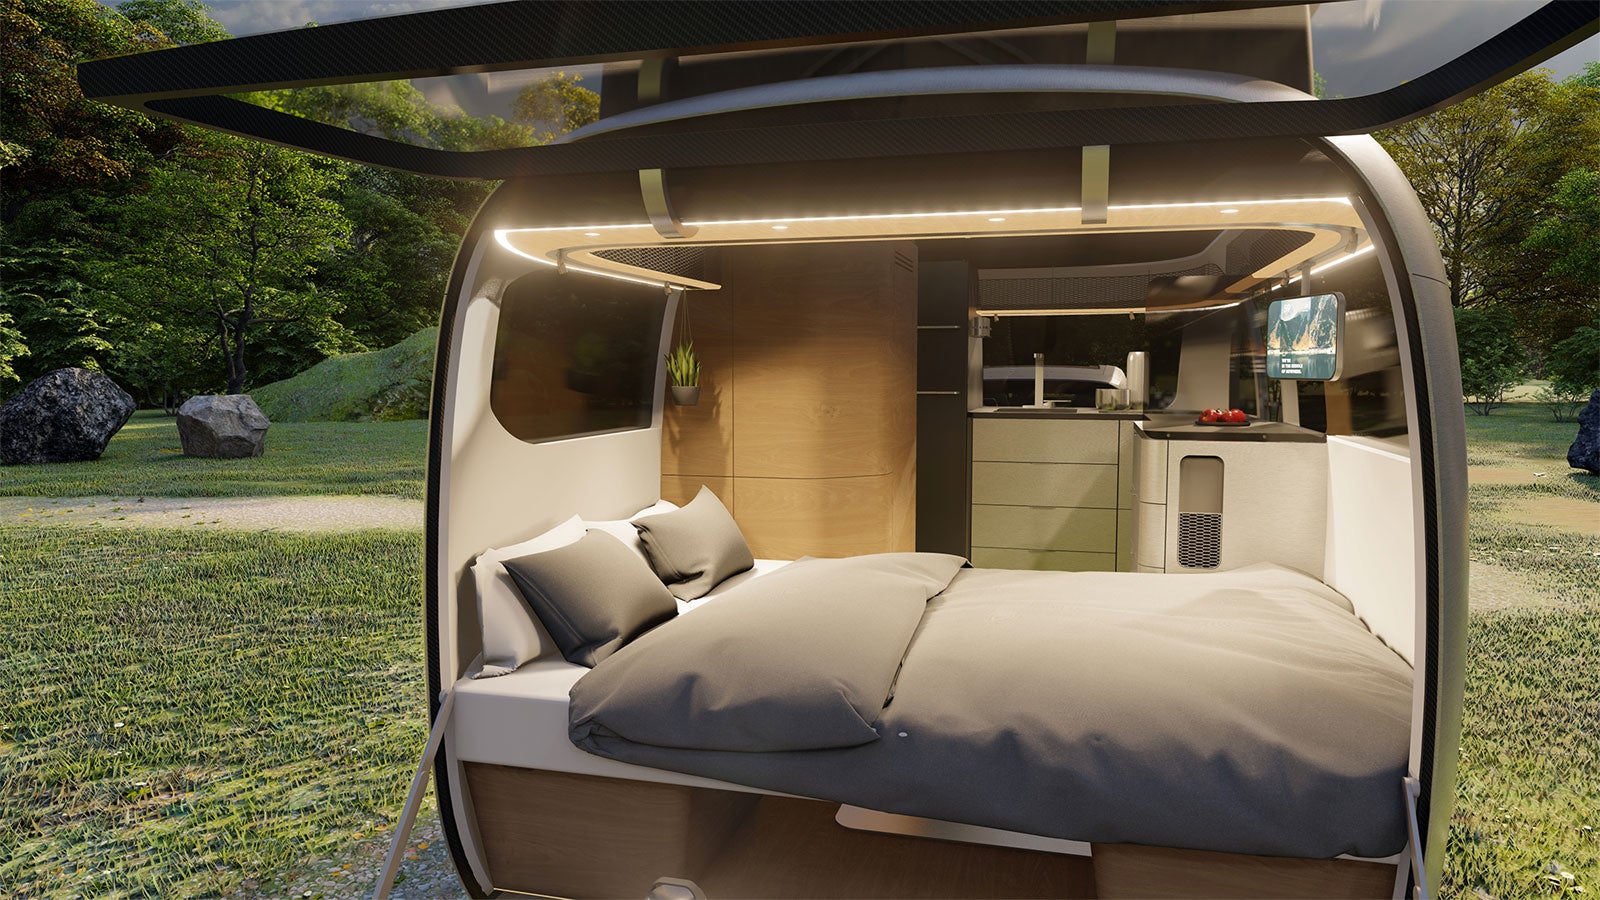 Airstream and Porsche’s Futuristic RV Would Look Great Hooked to Your Taycan